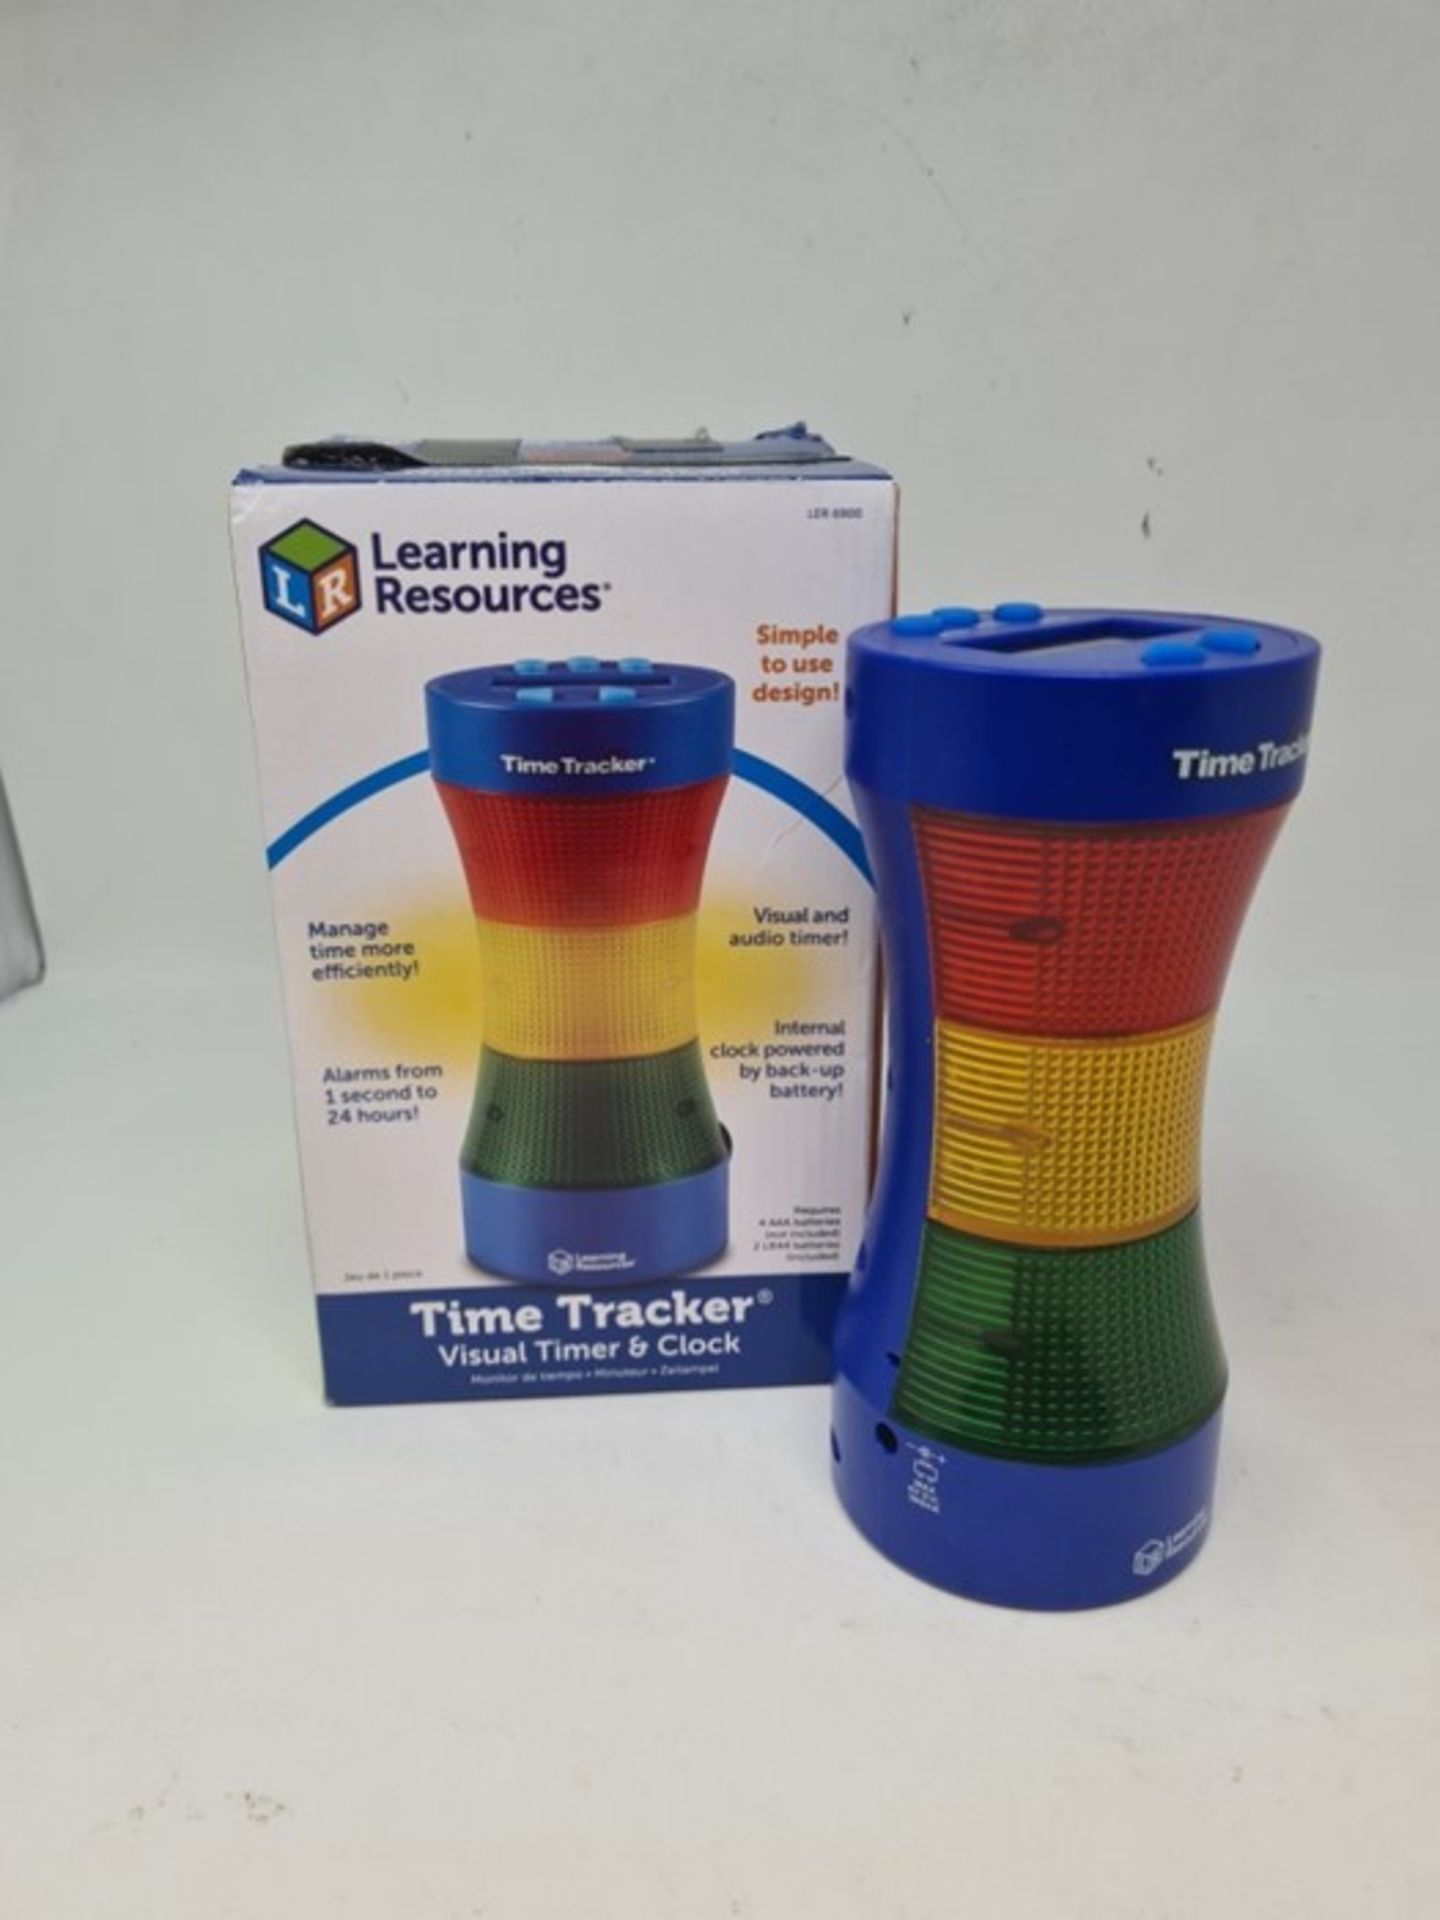 Learning Resources Time Tracker® Visual Timer & Clock - Image 2 of 2